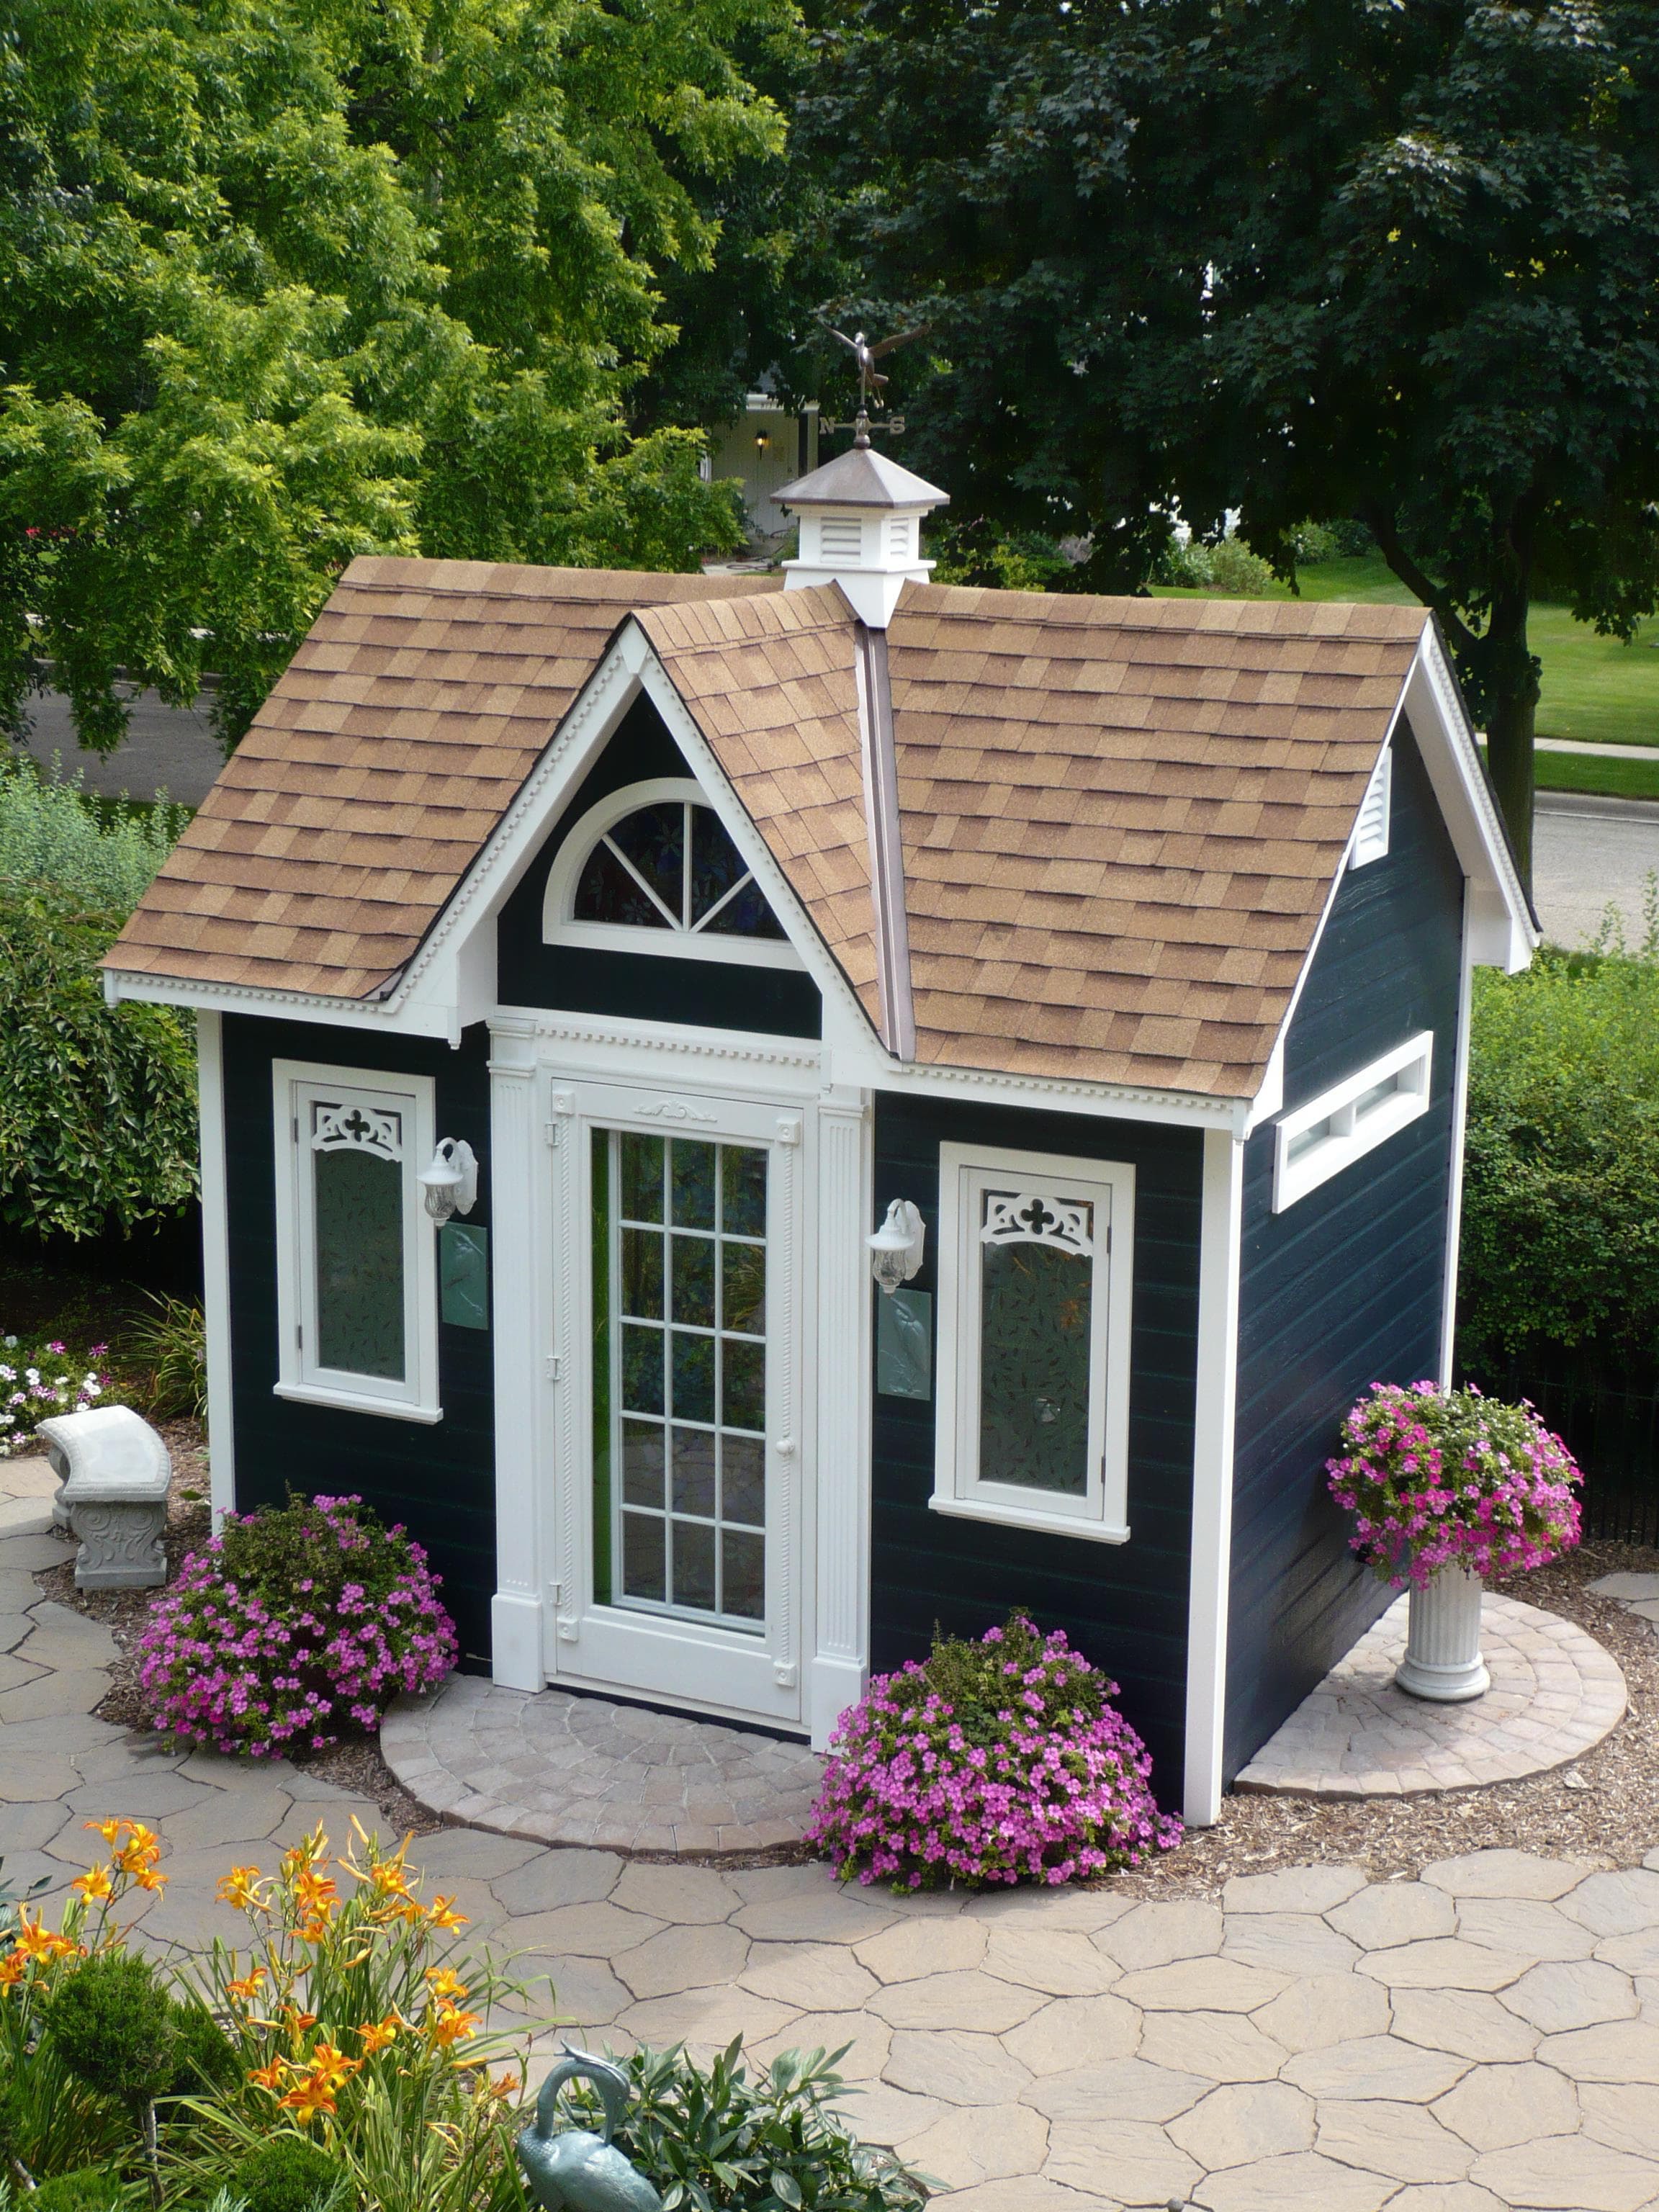 Copper Creek 8x12 home studio with sonoma cupola in Cedarburg Wisconsin. ID number 206859-2